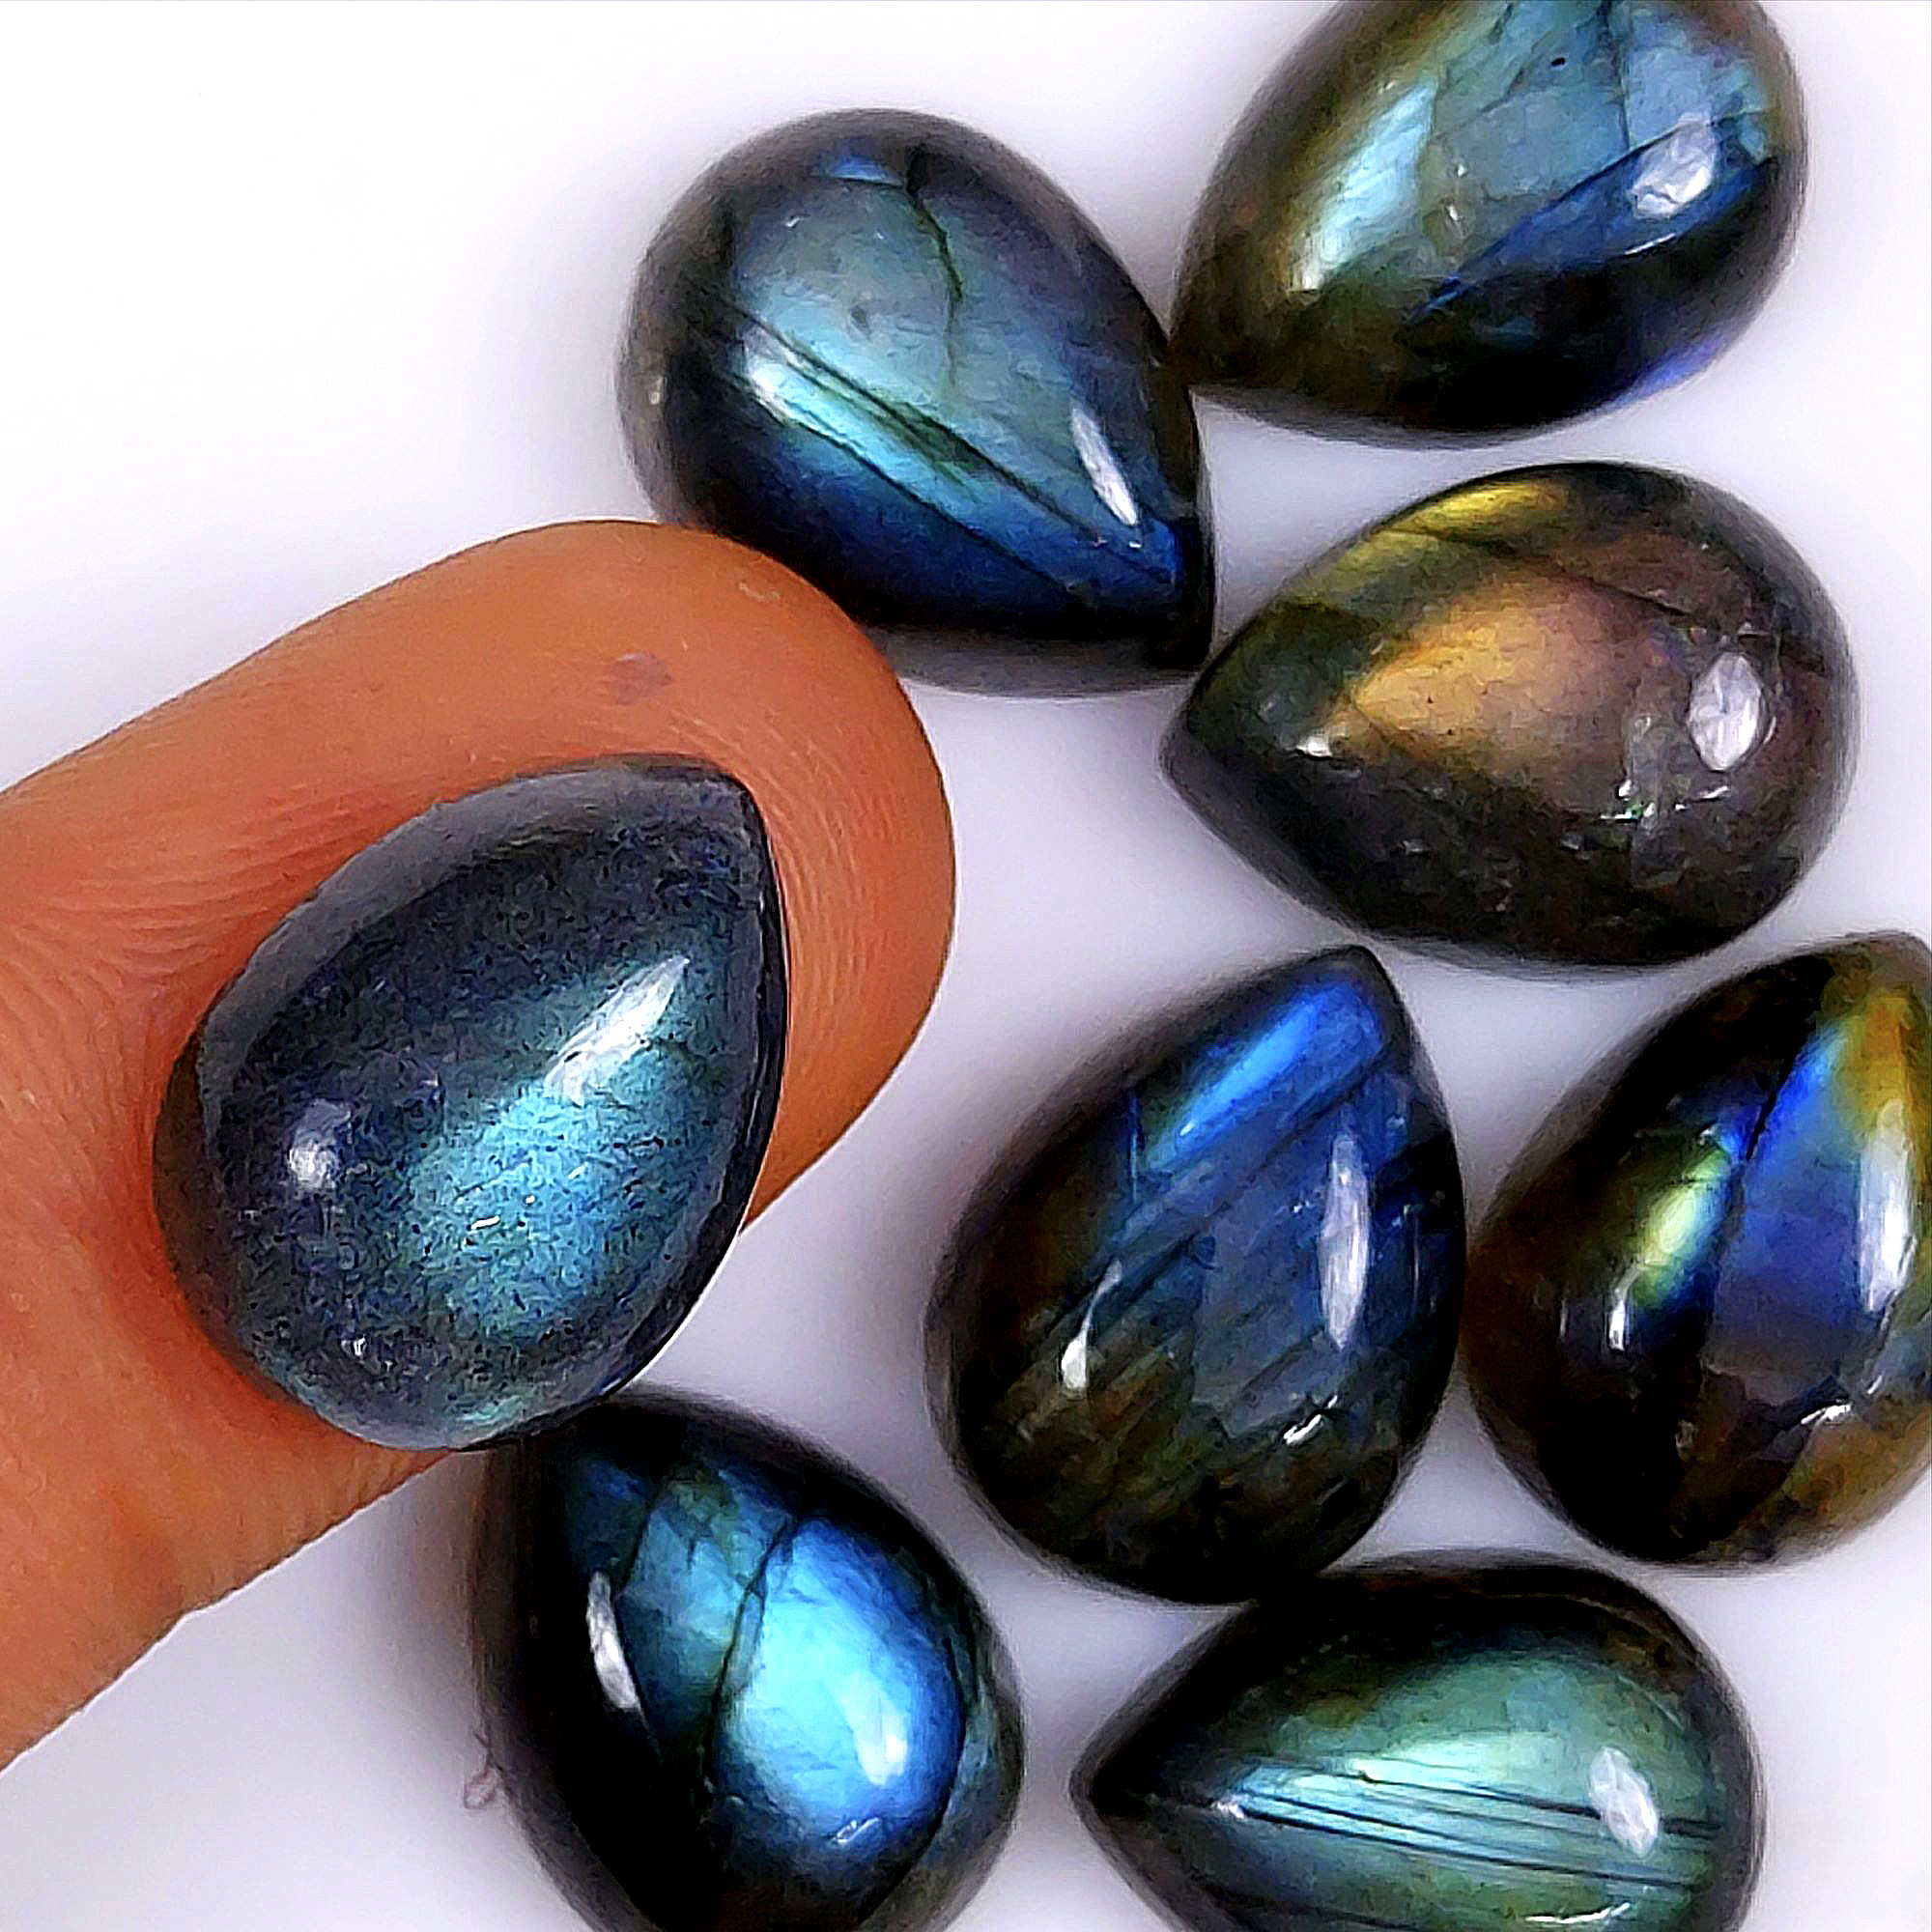 8 Pcs 73Cts Natural Labradorite Cabochon pear Shape Multifire Calibrated Loose Gemstone for jewelry making Wholesale Lots Size12x16mm#G-1588